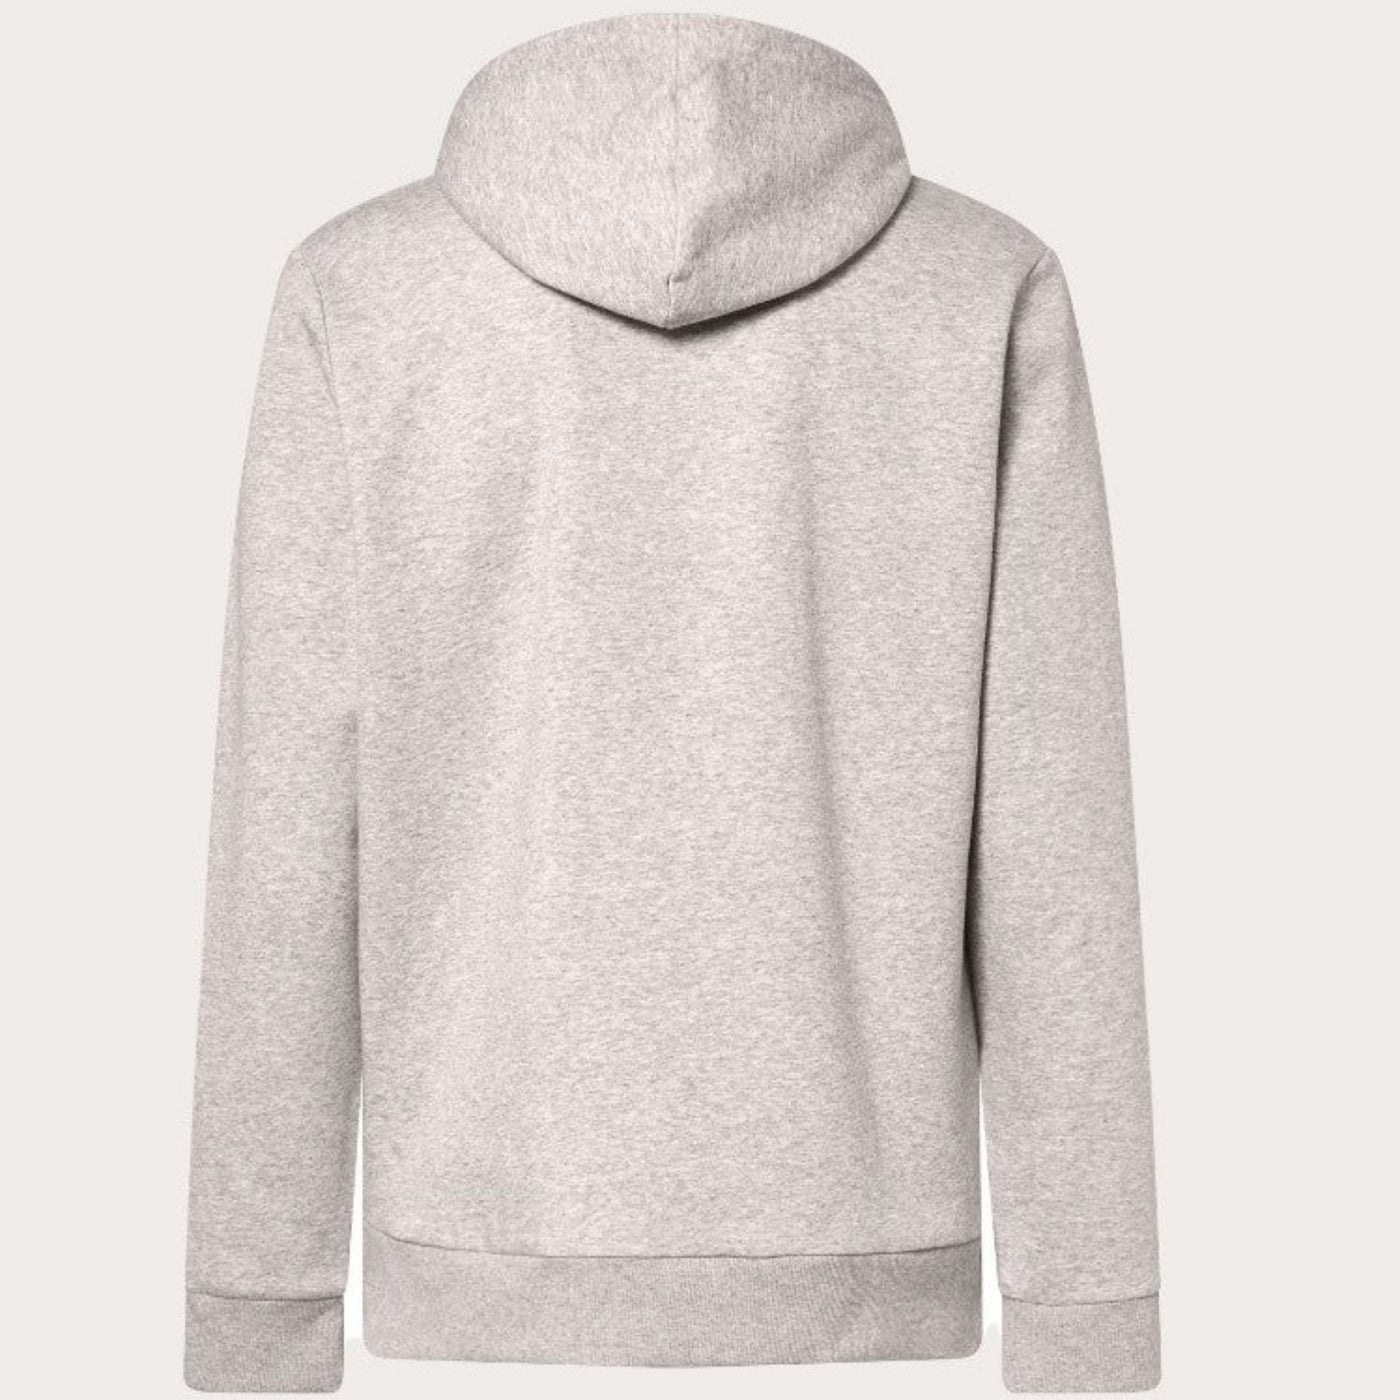 Oakley Relax Pullover Hoodie 2.0 - New Granite Heather